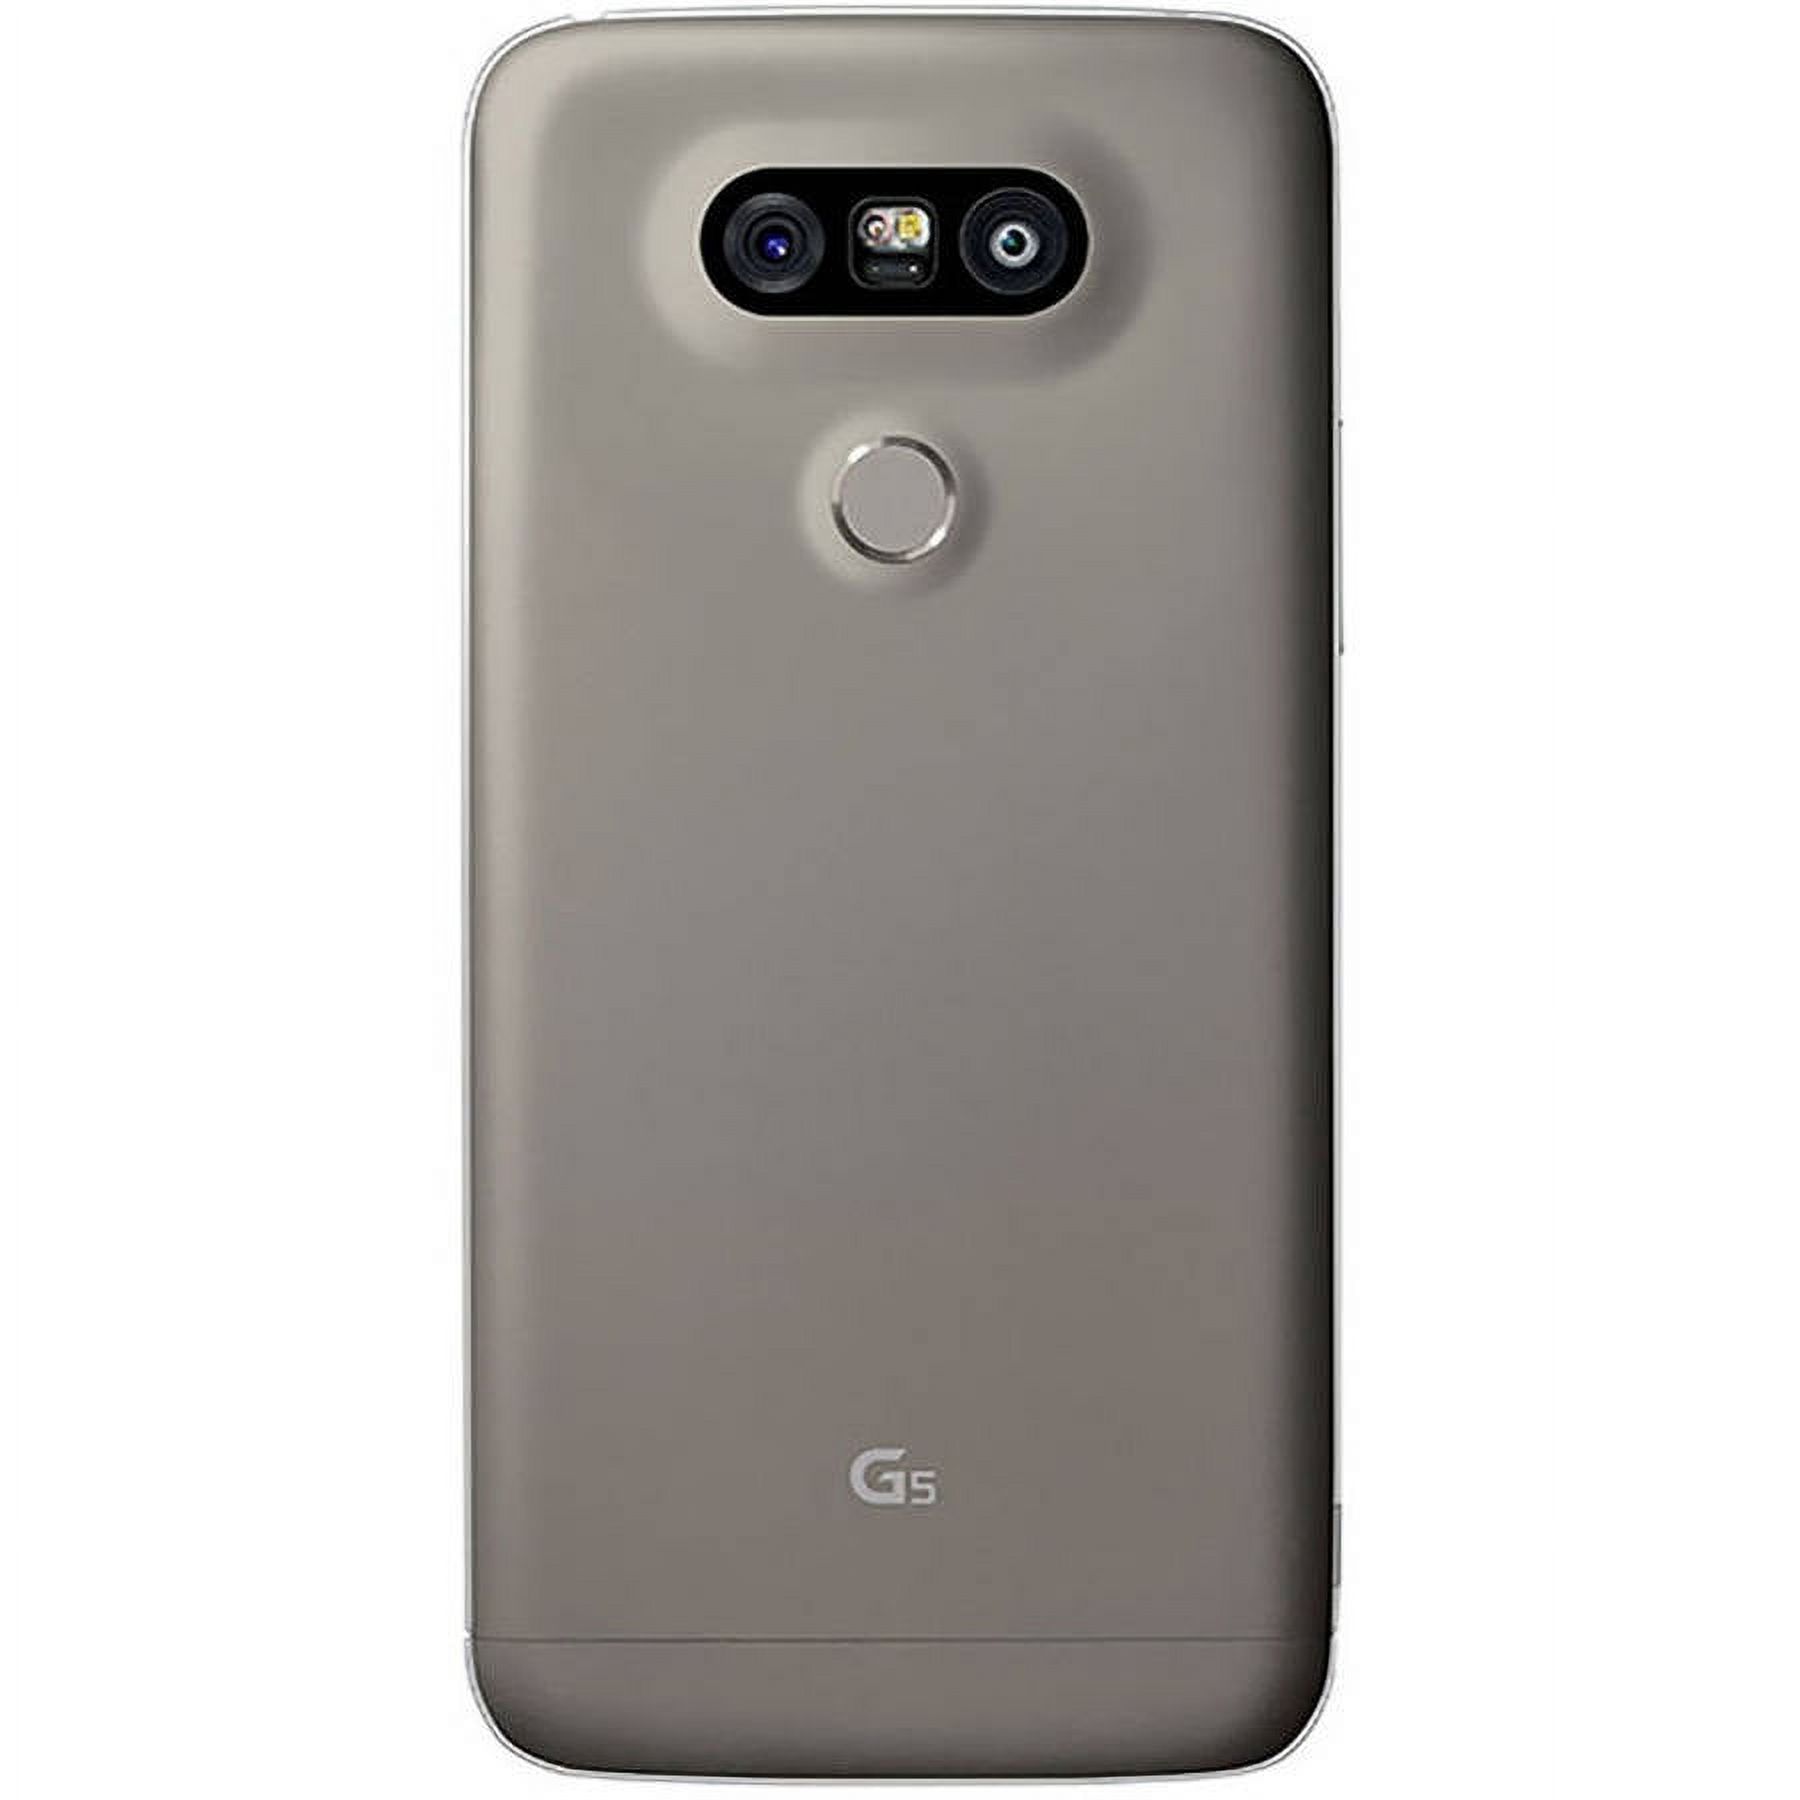 LG G5 RS988 32GB Unlocked GSM 4G LTE Quad-Core Android Phone w/ 16 MP Camera - Black - image 3 of 6